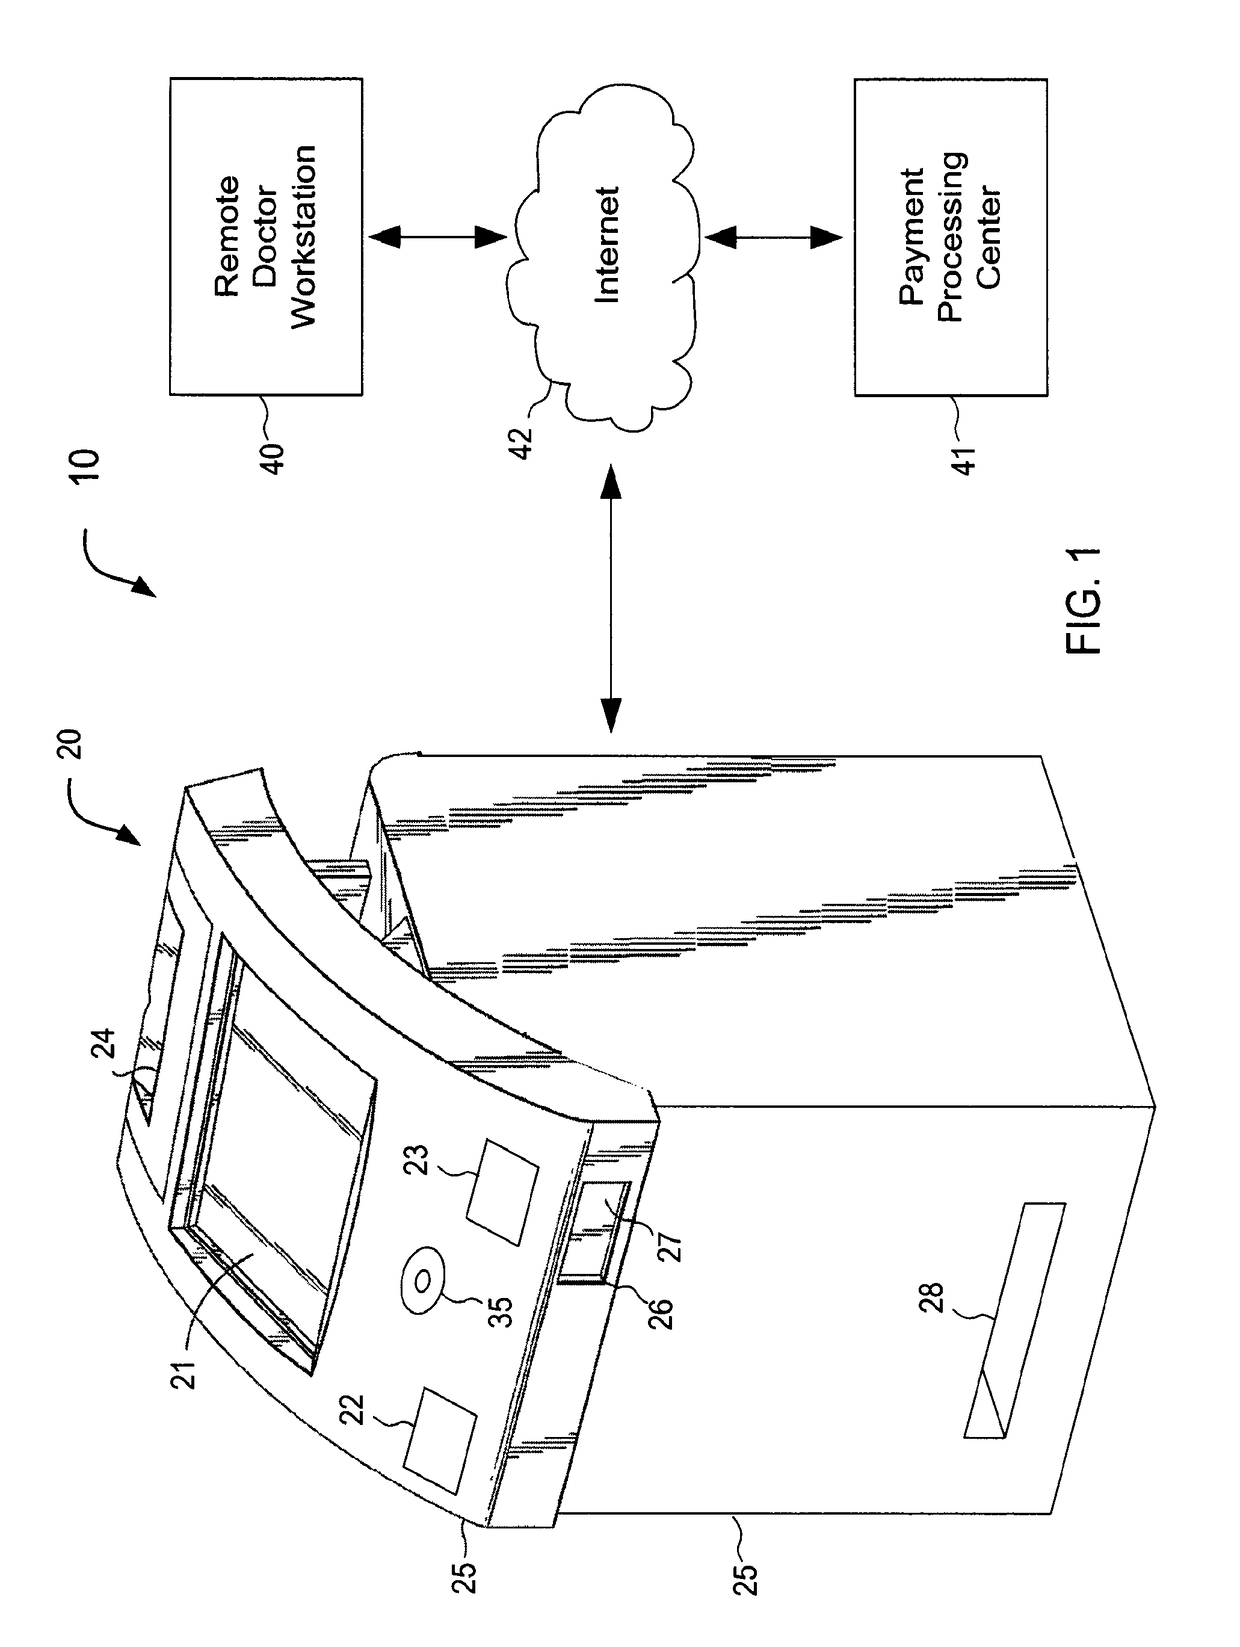 Apparatus and methods for analyzing a medical condition